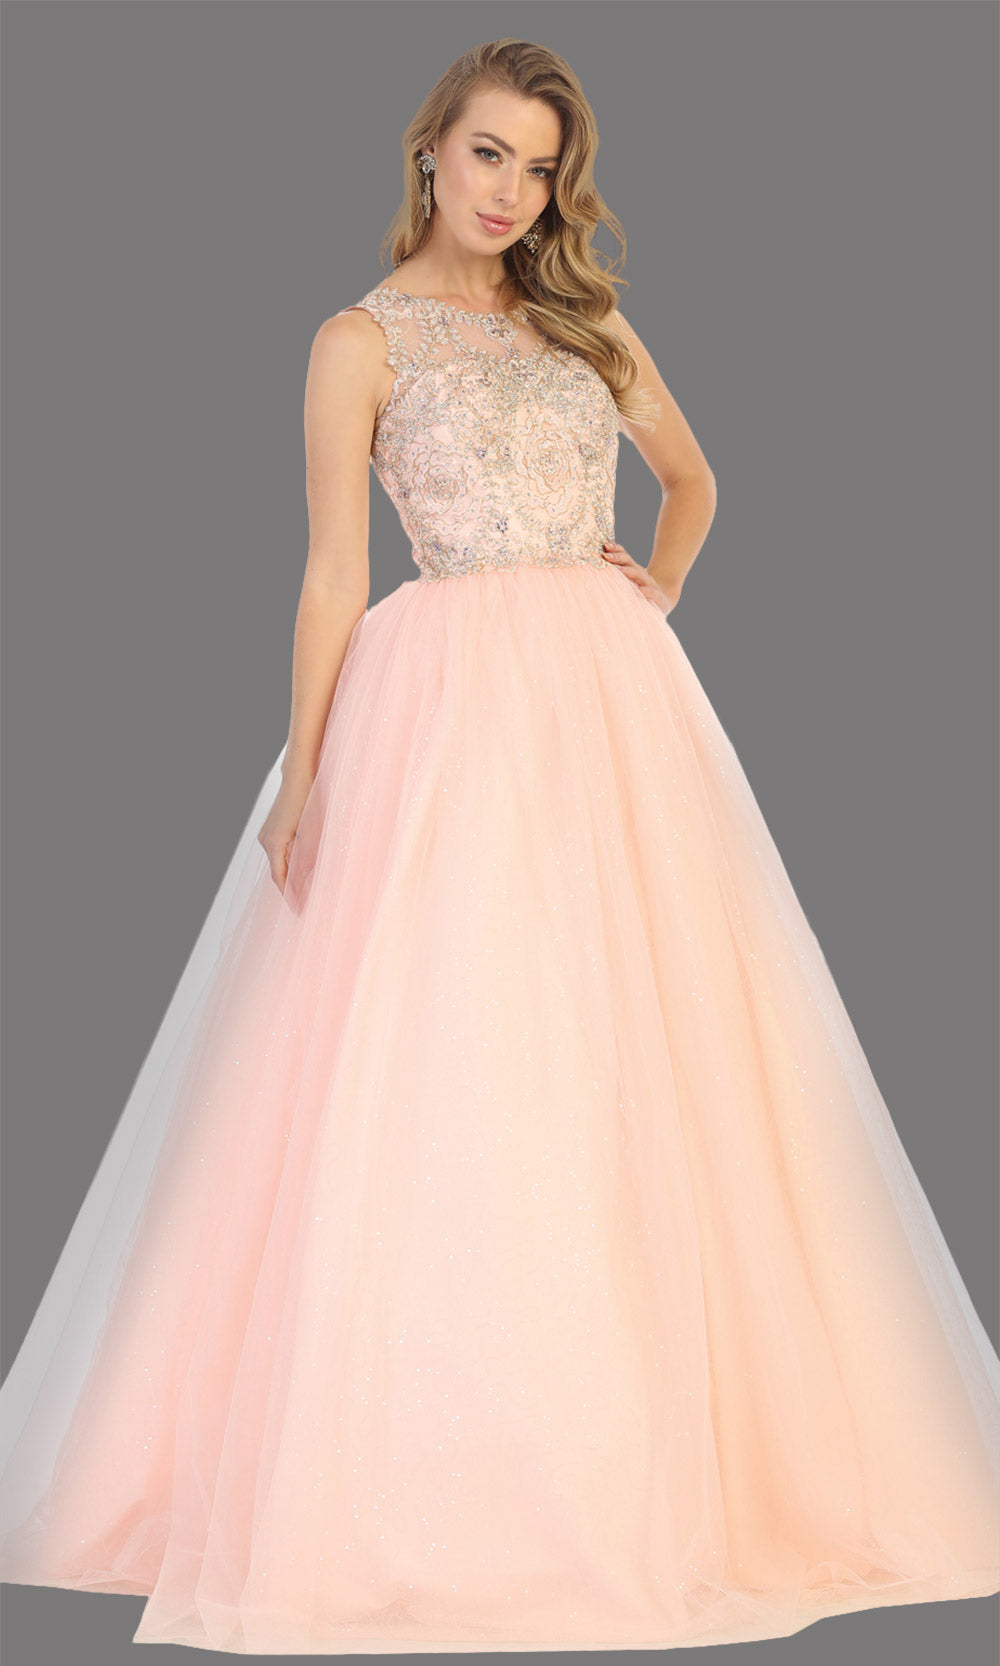 Mayqueen LK137 blush pink quinceanera high neck w/gold lace ball gown. Light pink sequin ball gown is perfect for engagement dress, wedding reception, indowestern party gown, sweet 16, debut, sweet 15, sweet 18. Plus sizes available for ballgowns.jpg